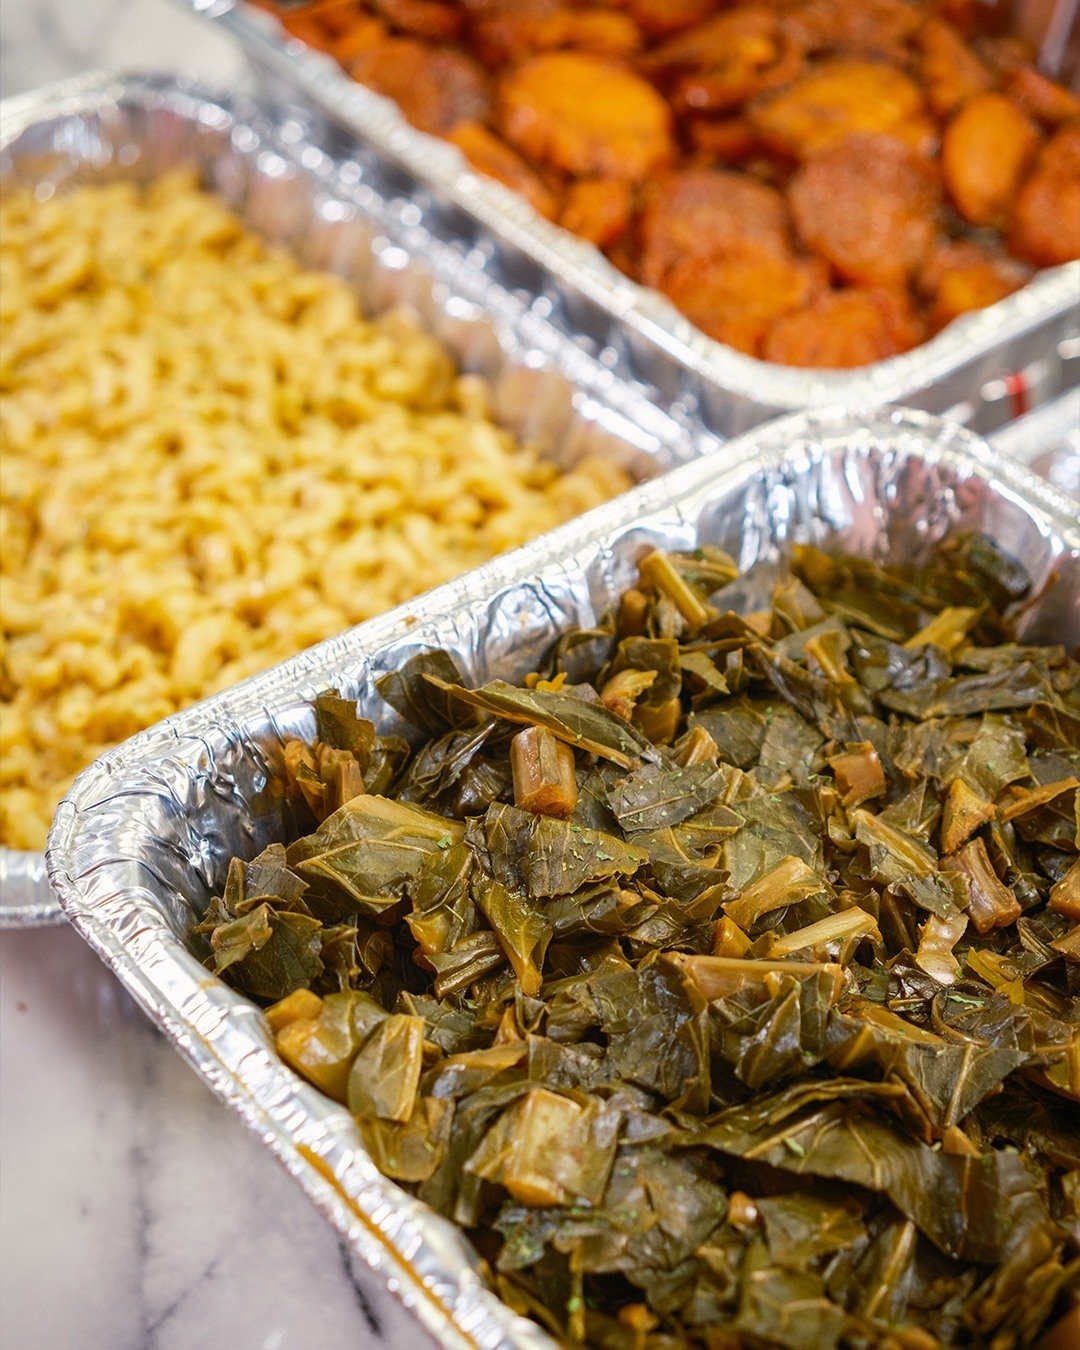 Let our Catering add a touch of soul to your special occasion! Our dishes will have your guests smiling and satisfied. 😋

Send us a message today to get started! 👈

🌱Nanas Kitchen
🗓️Tue-Sun 11am-7pm
💻www.nanaskitchenaz.com
📍777 N Arizona Ave Su